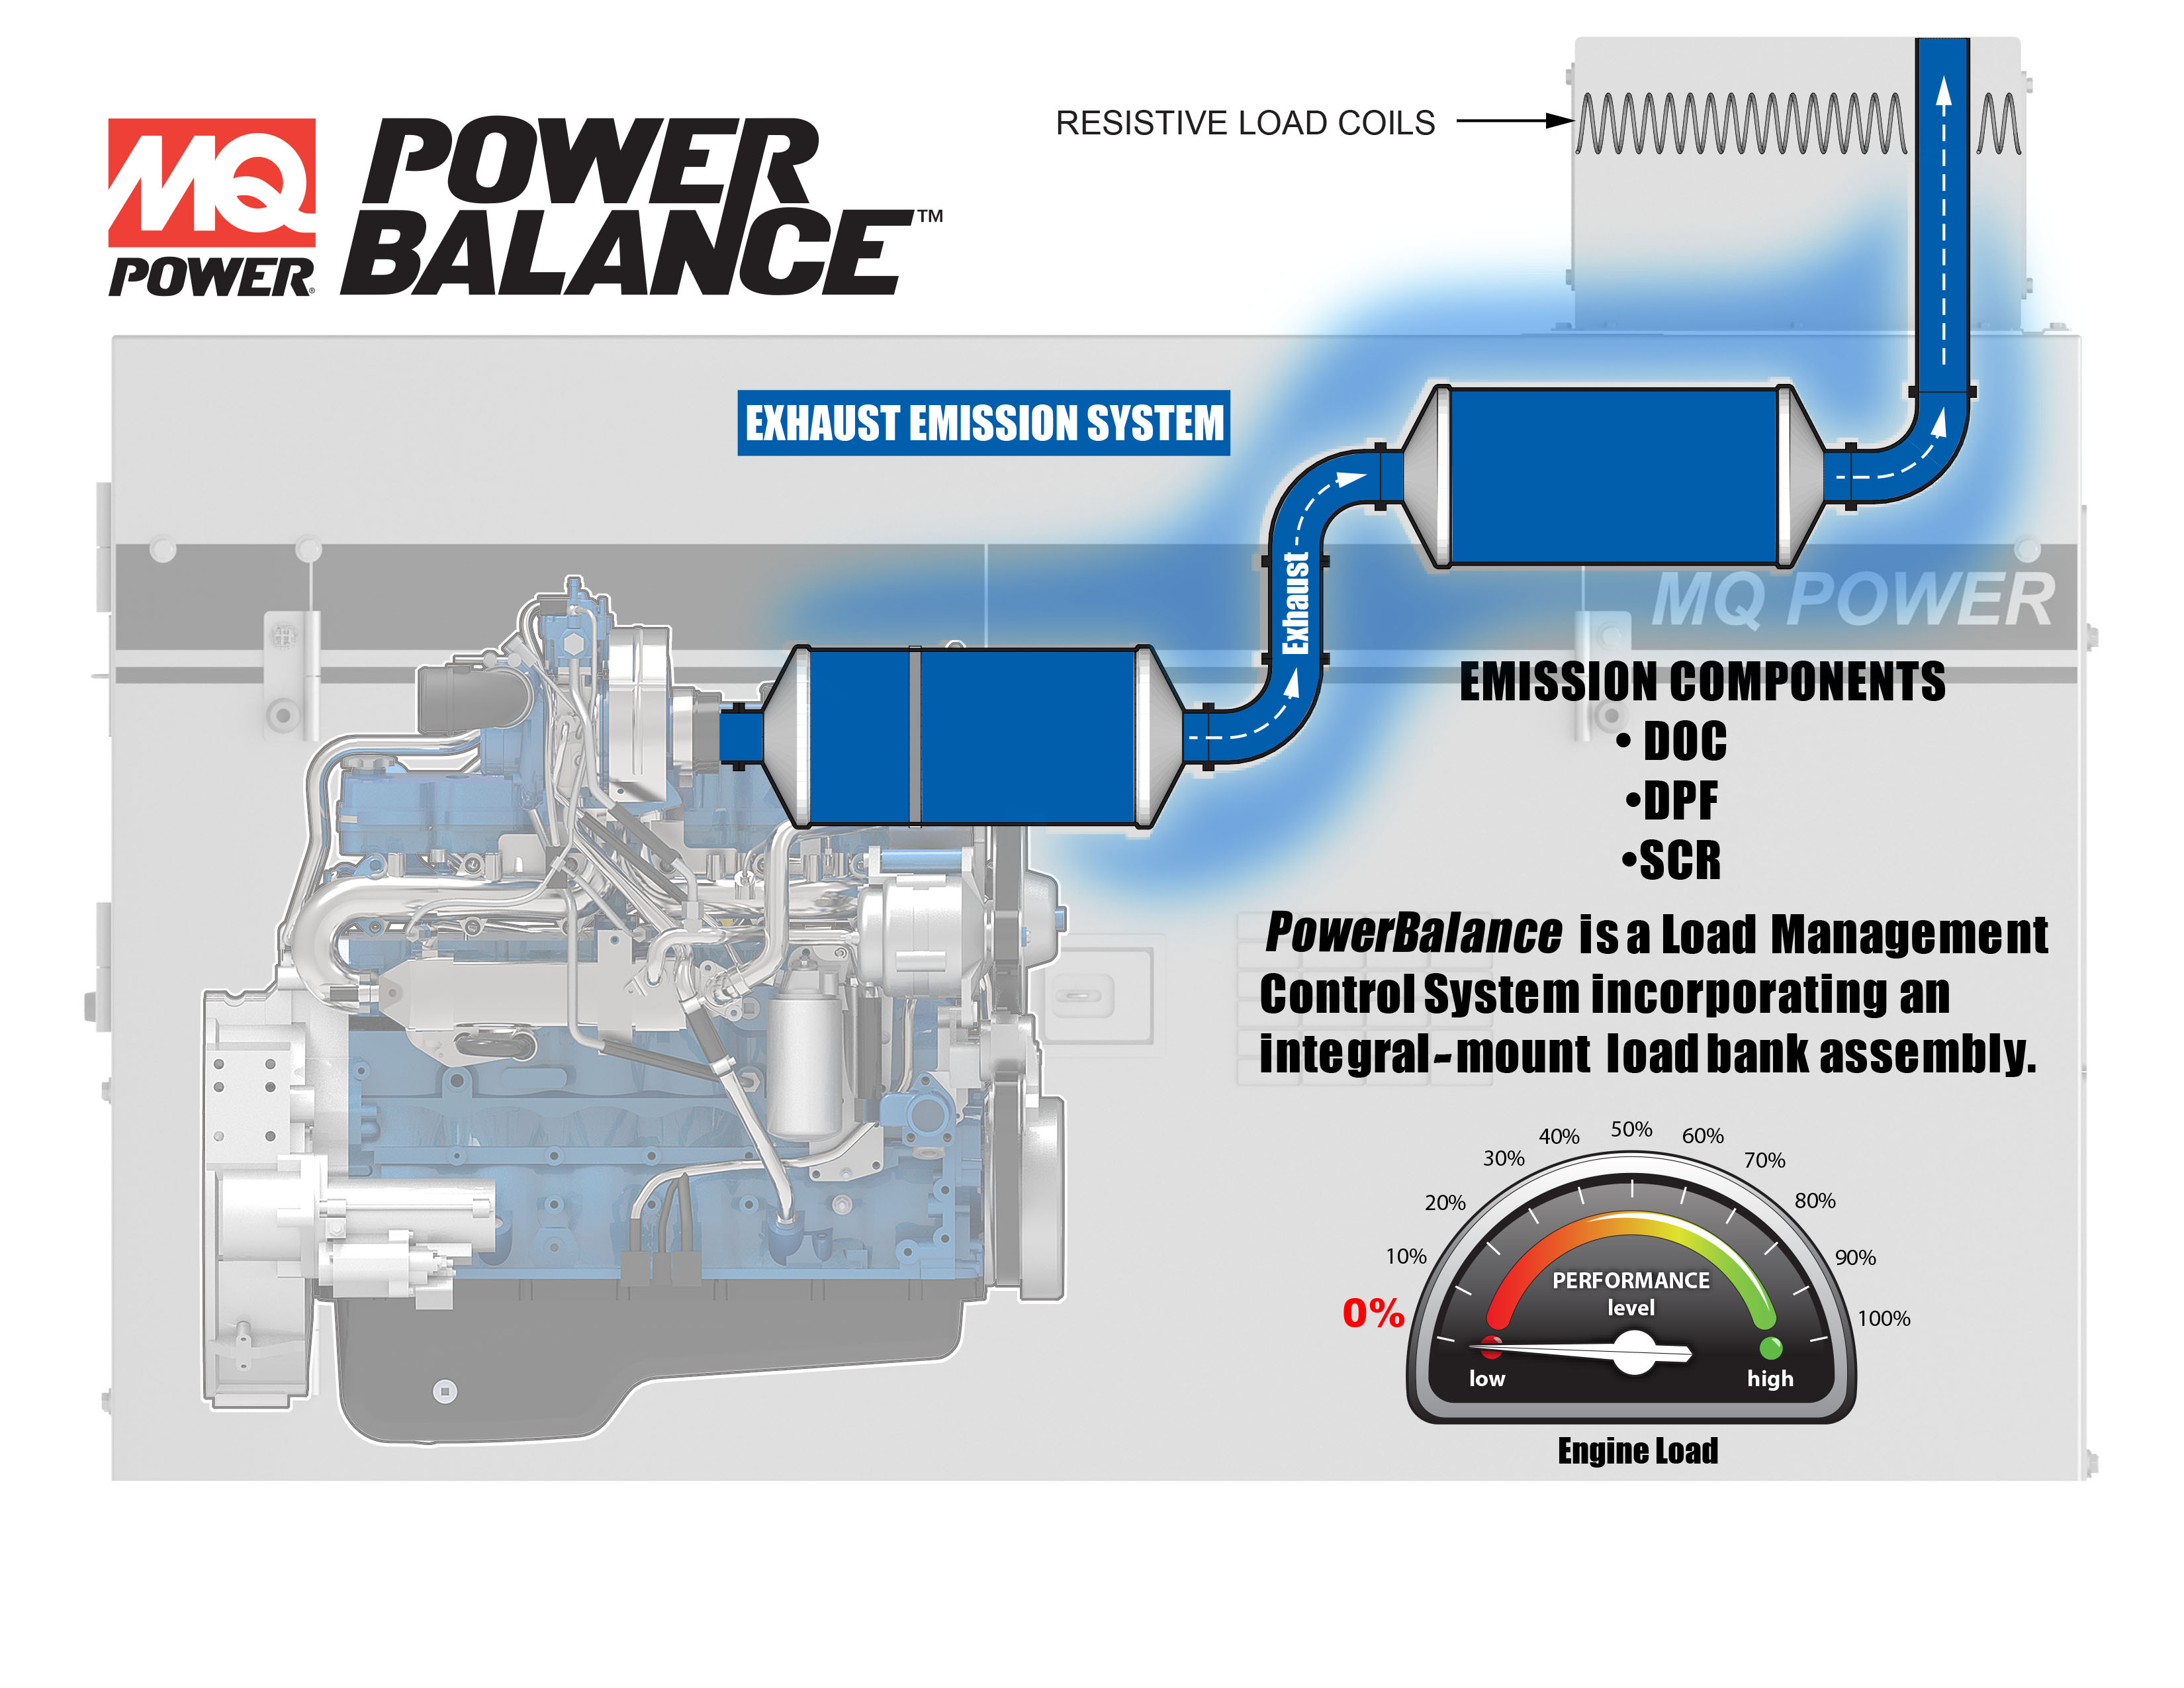 PowerBalance™ is a Load Management Control System